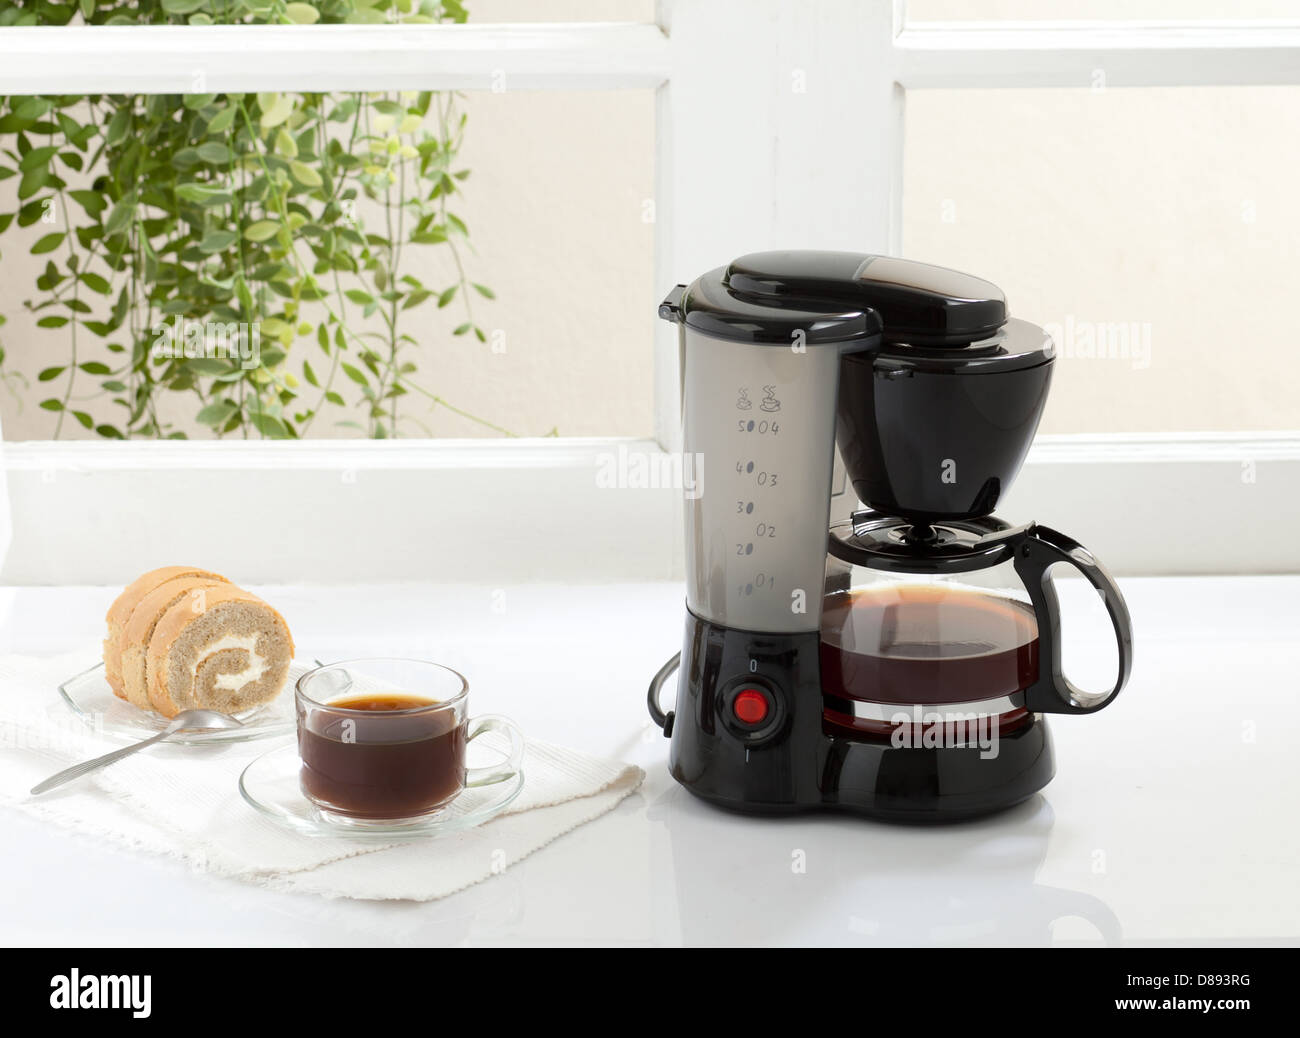 Enjoy your breakfast or coffee break with coffee maker and boiler machine Stock Photo